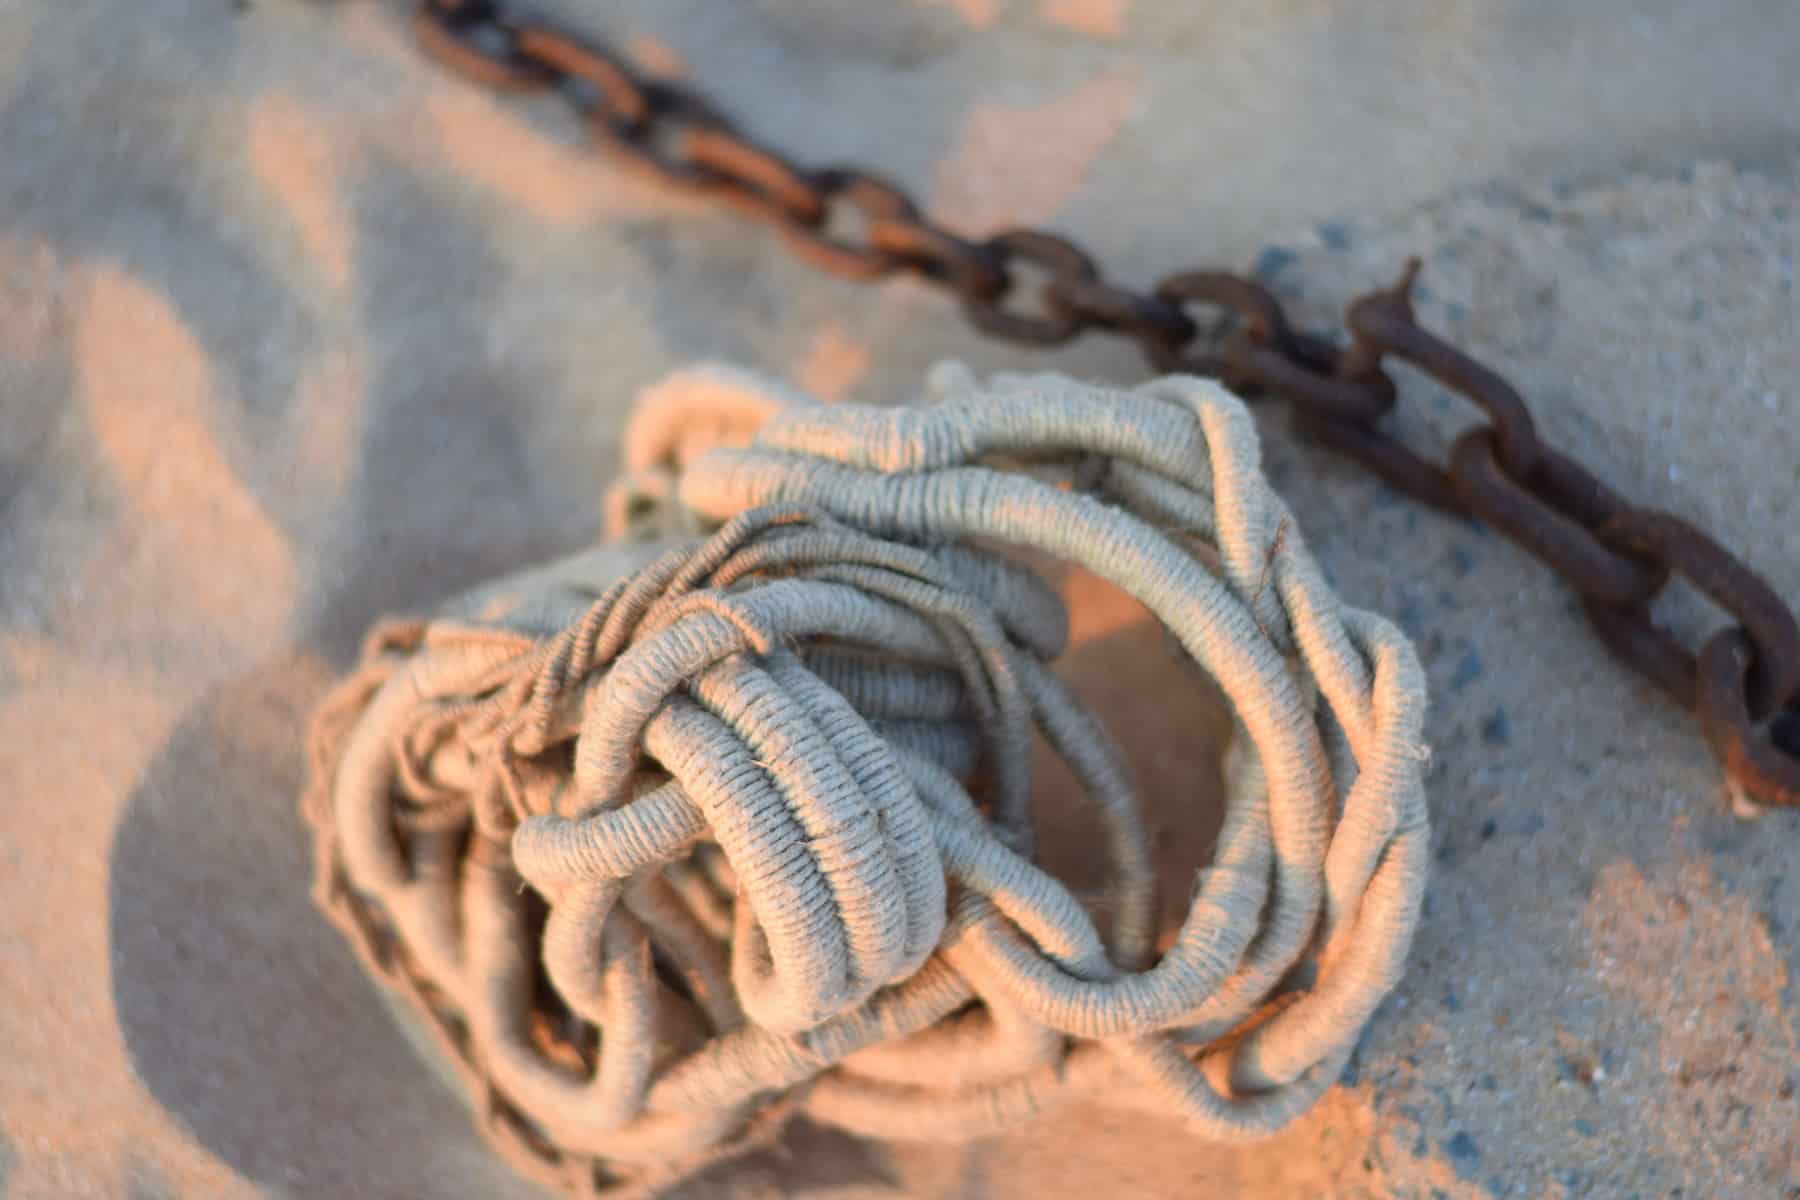 coral-like white sculpture by Aude Franjou in beach sand next to rusty iron chain